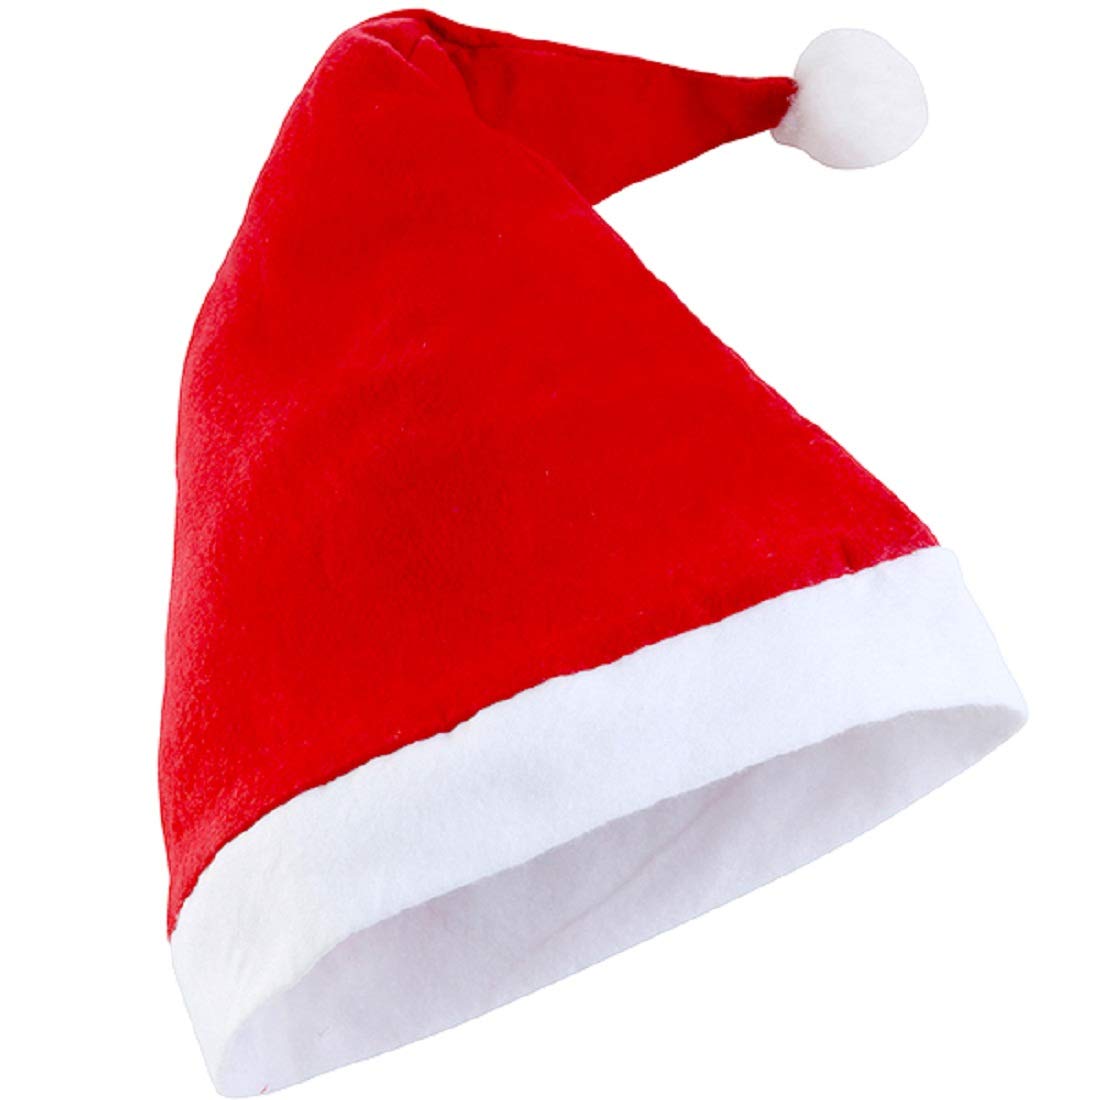 eCraftIndia Red and White Merry Christmas Hats, Santa Claus Caps for kids and Adults - Free Size XMAS Caps, Santa Claus Hats for Christmas, New Year, Festive Holiday Party (Set of 9) 2